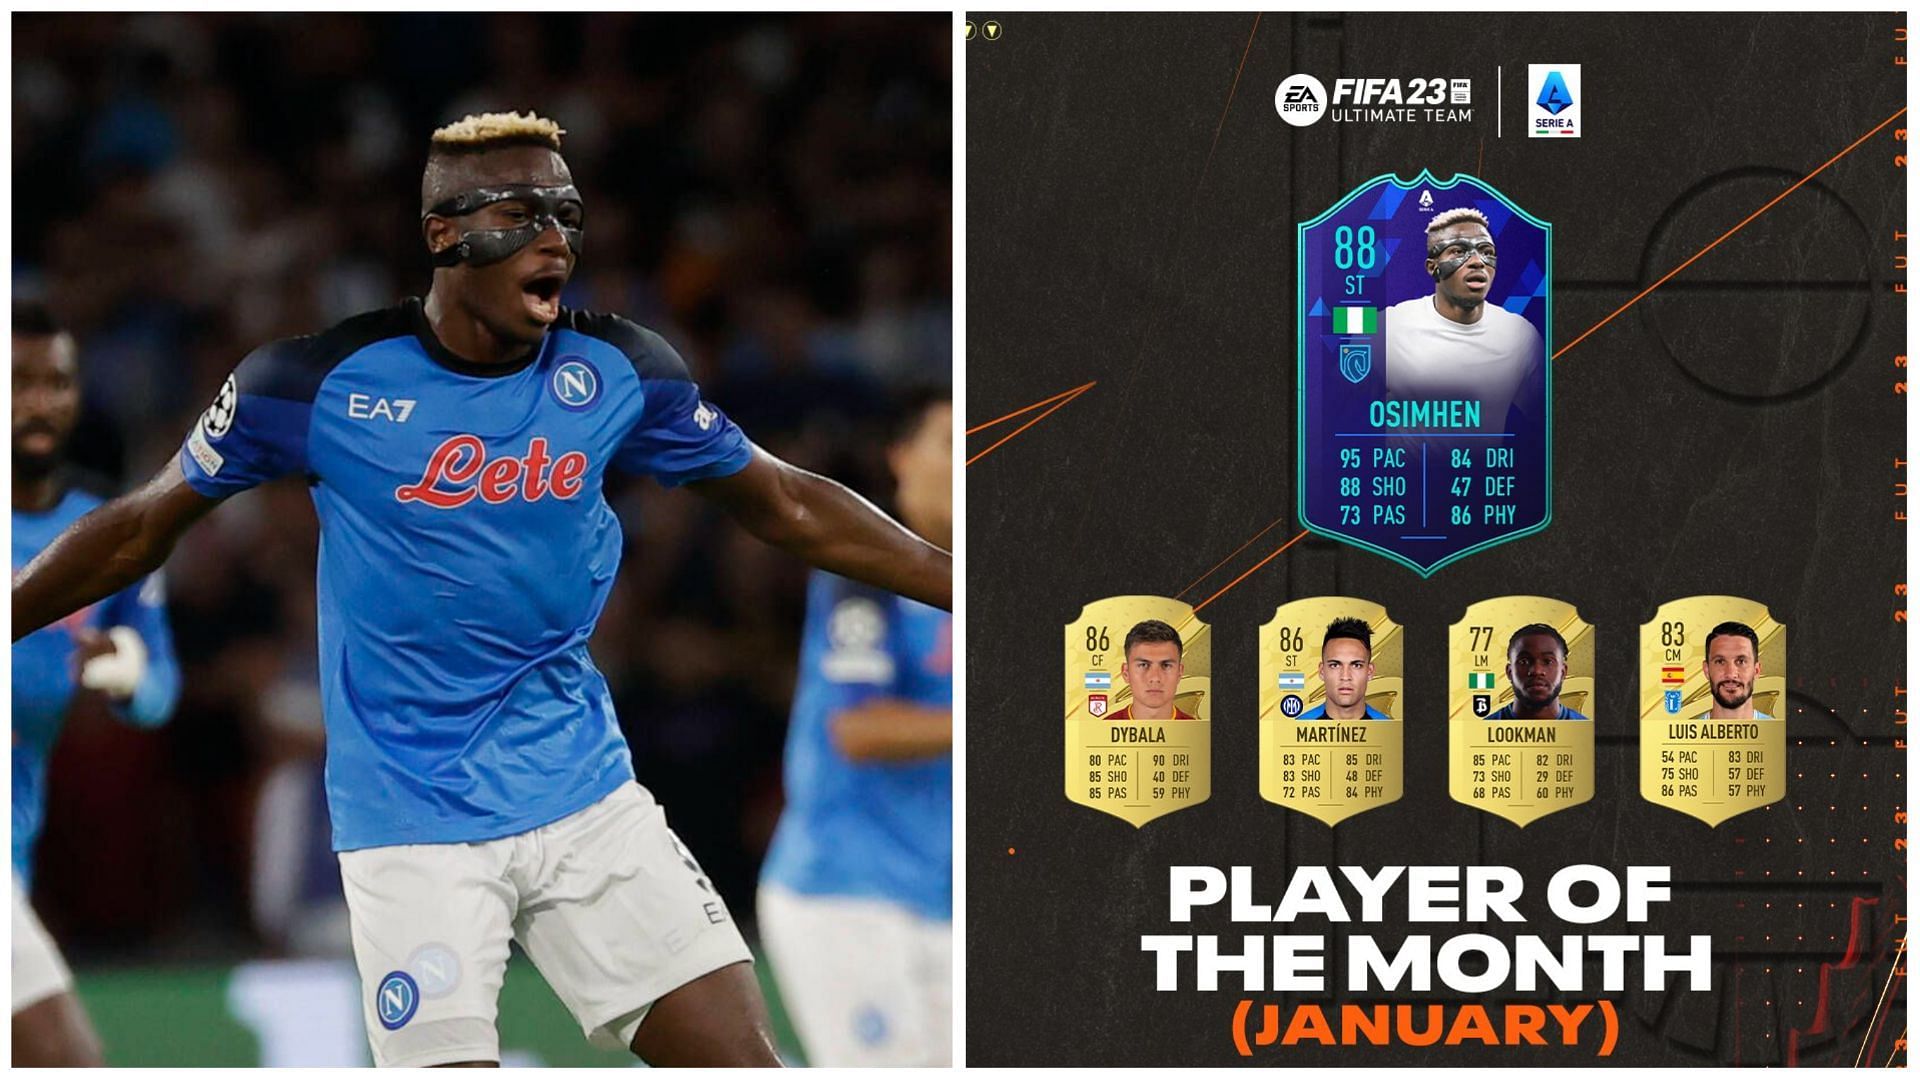 FIFA 23 Player of the Month Osimhen SBC: How to complete, expected costs, and more